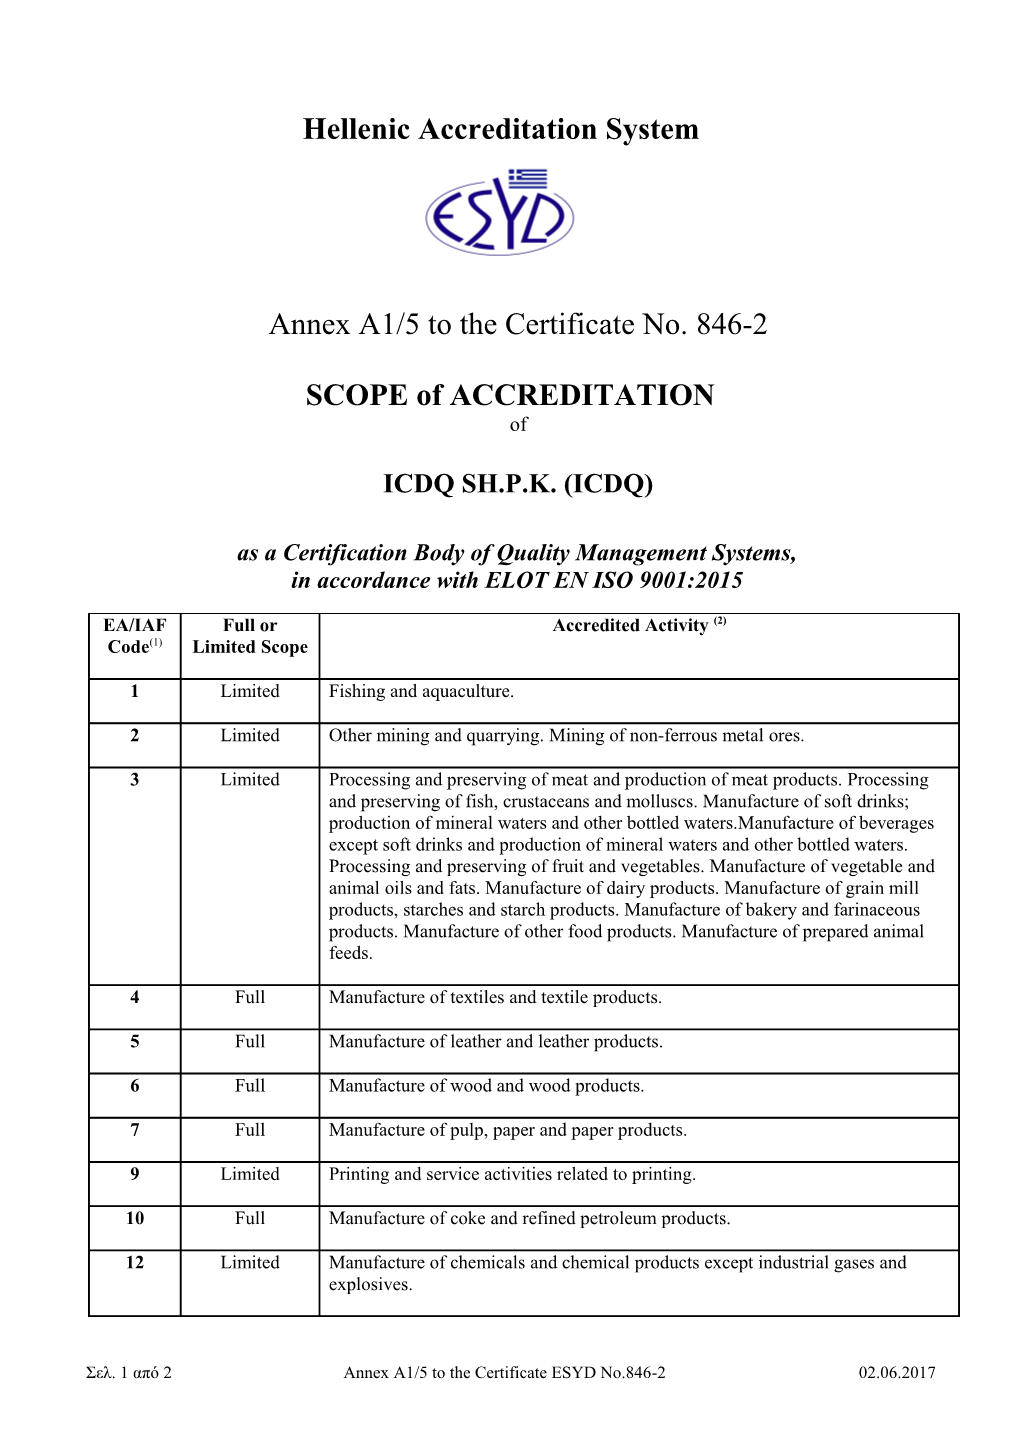 Hellenic Accreditation System s13